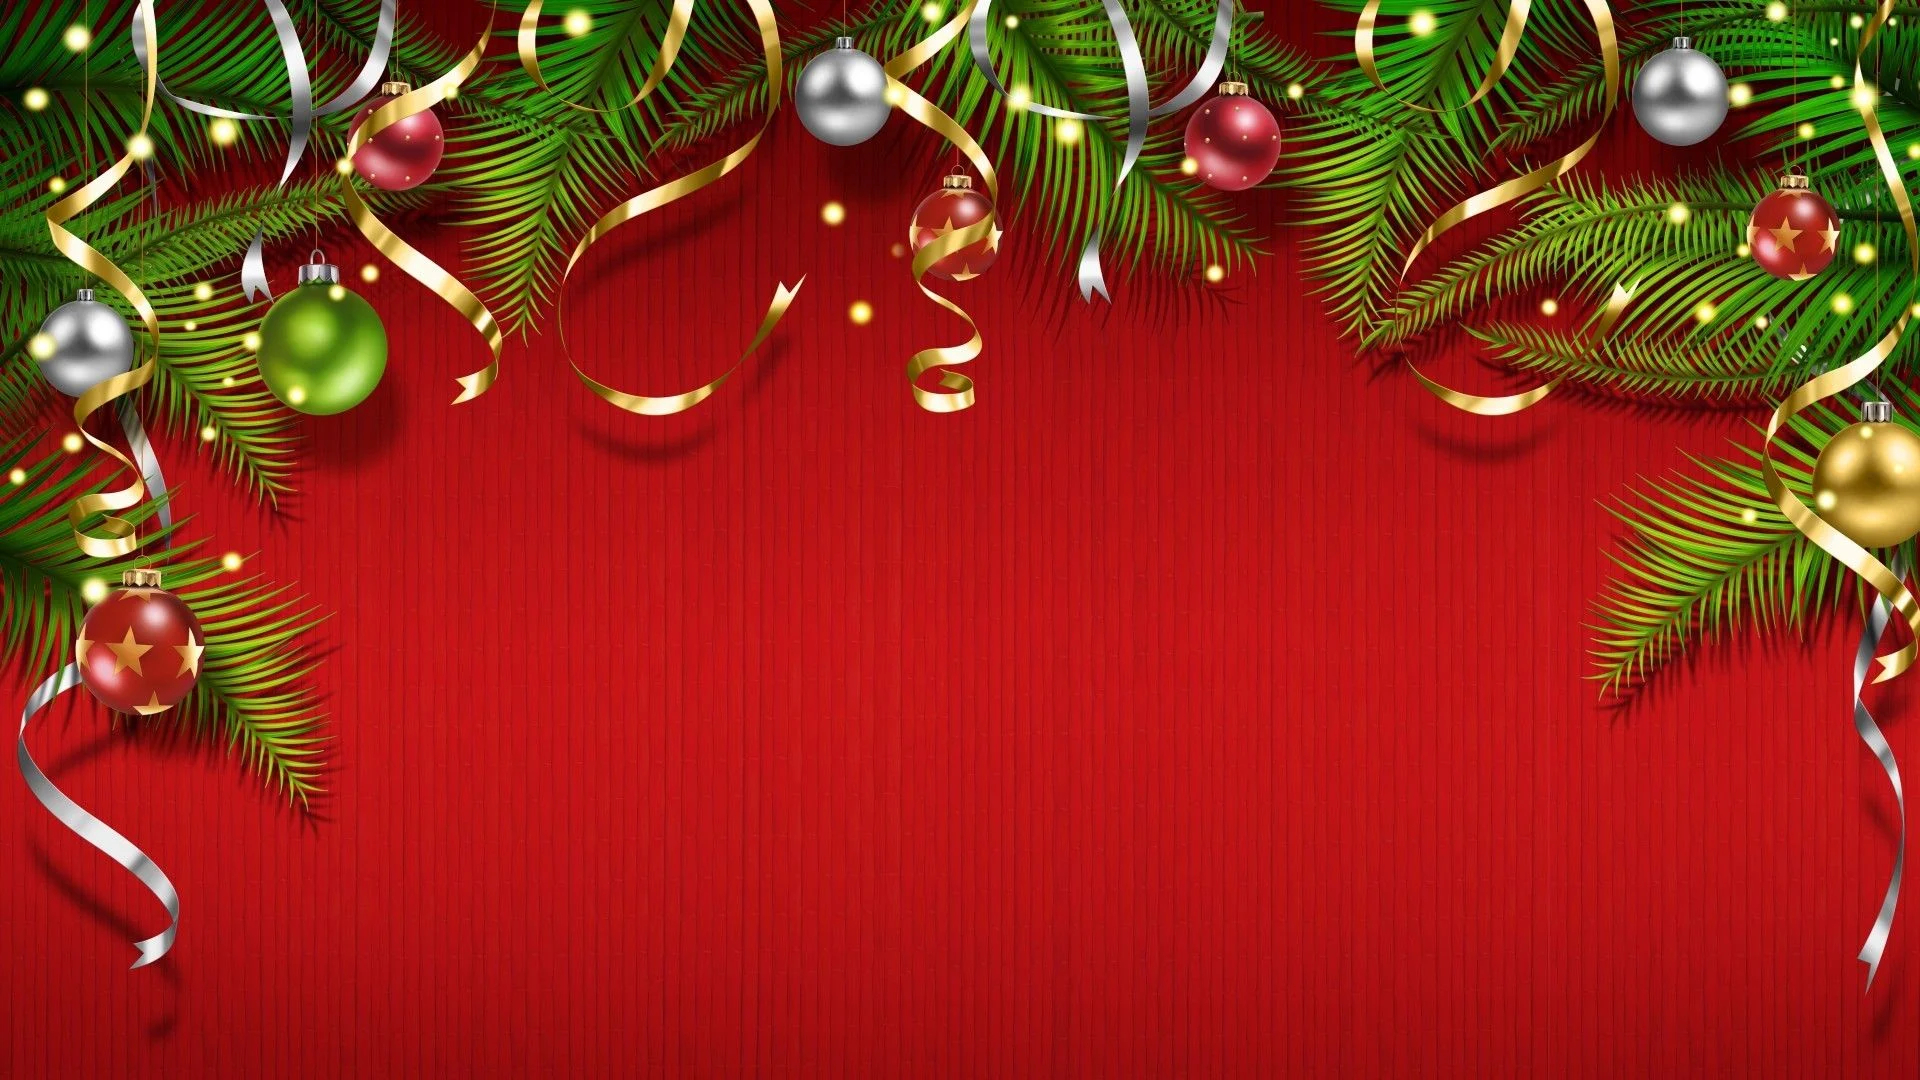 1920x1080 Red and Green Christmas Wallpapers Top Free Red and Green Christmas Backgrounds